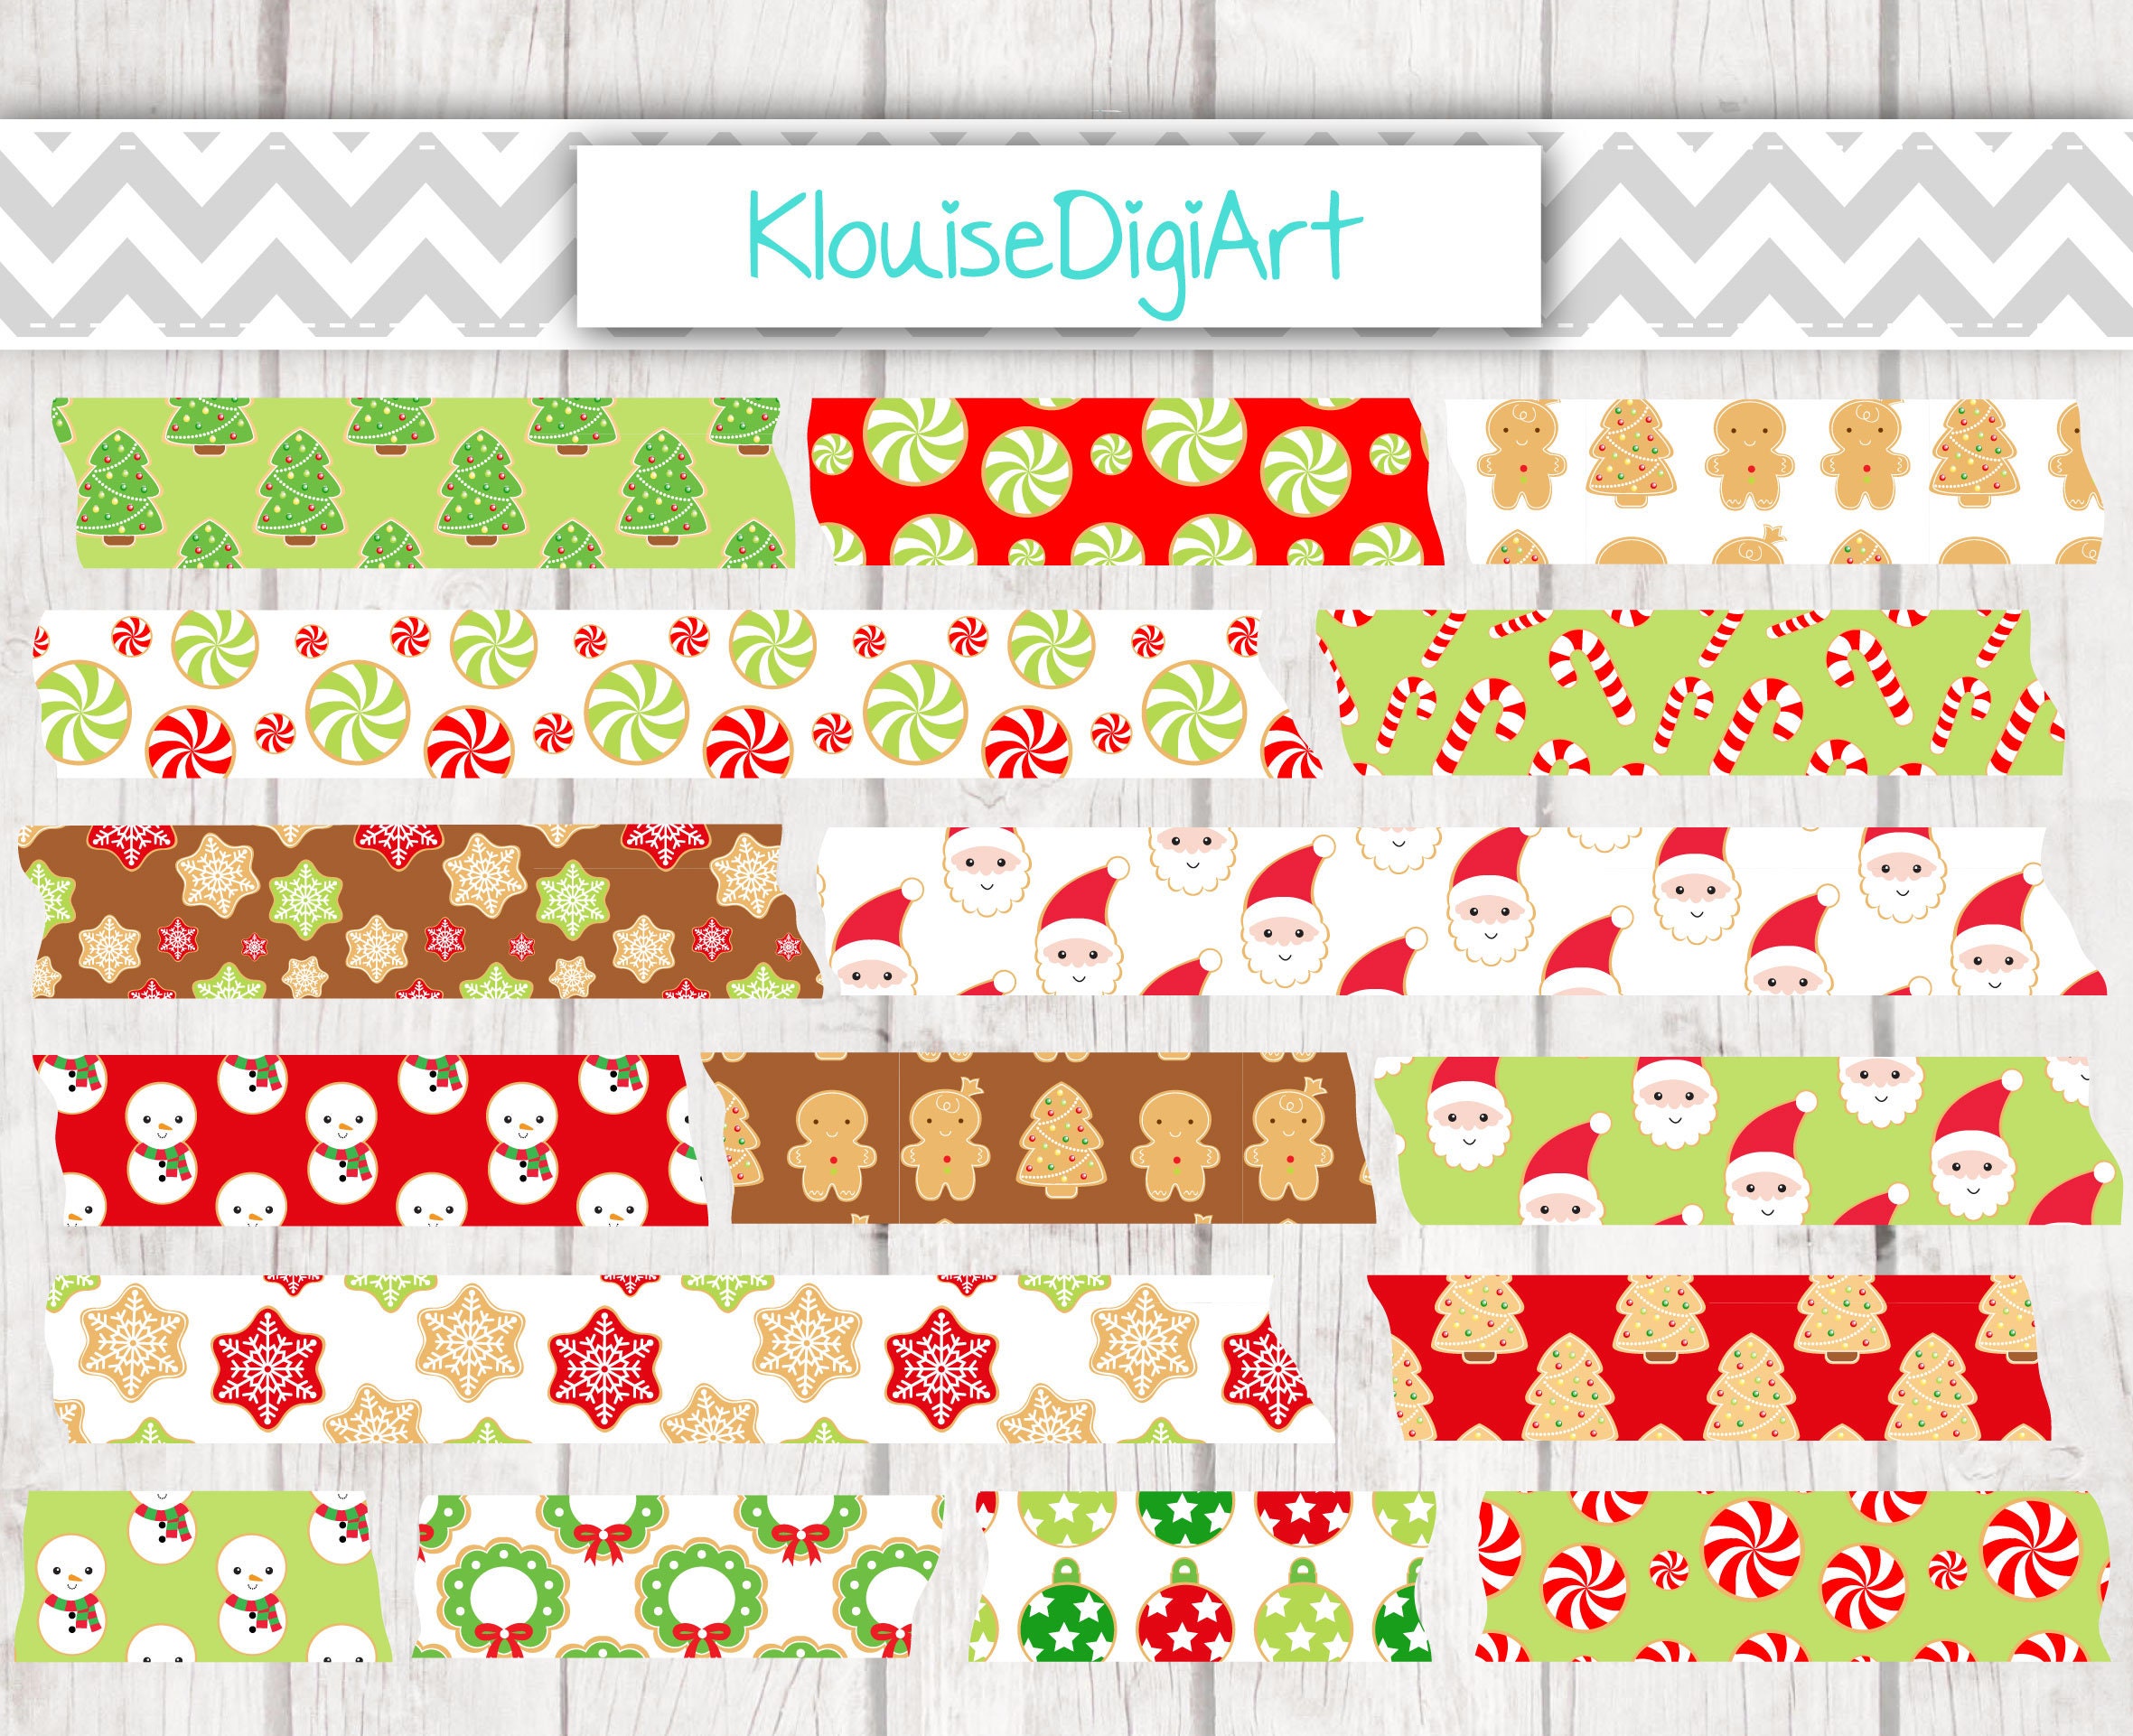 Free Green Soccer Washi Tape for Digital Scrapbooking and Other Crafts